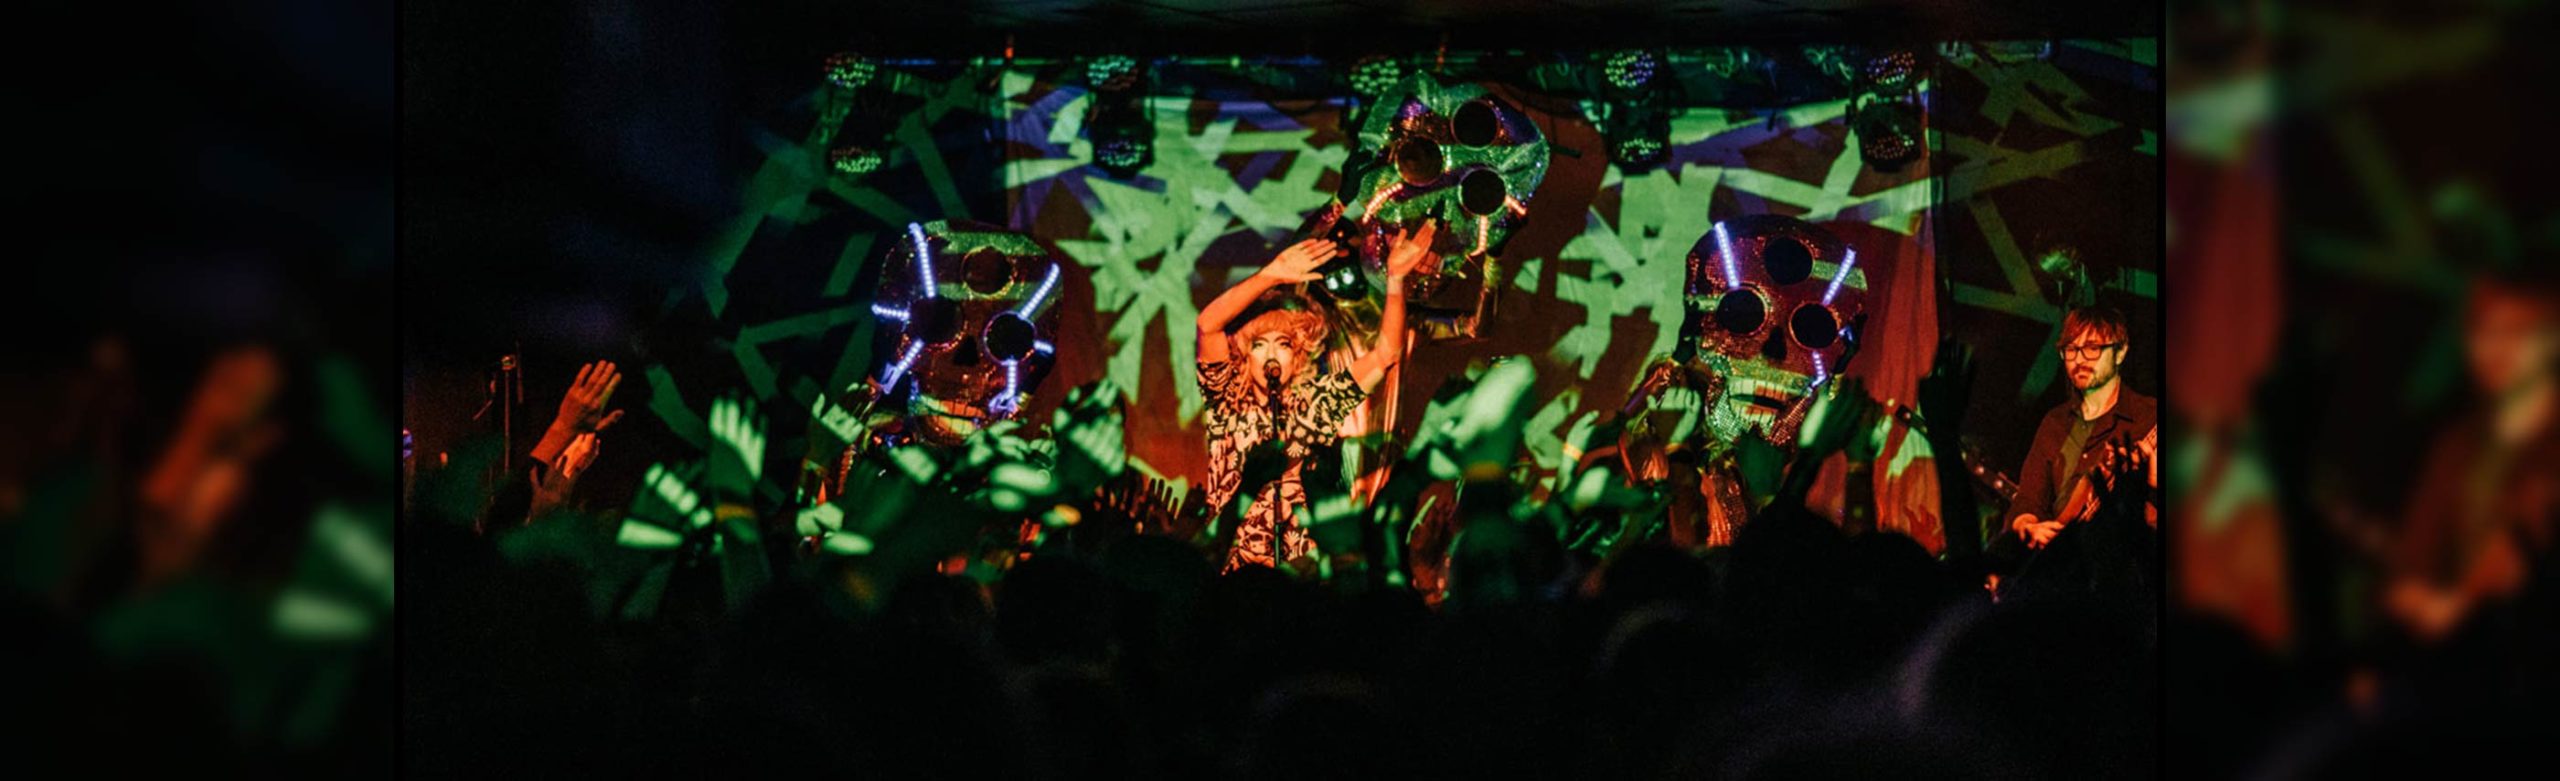 Win Tickets to of Montreal at The Wilma + Groove to the Music Merchandise Image